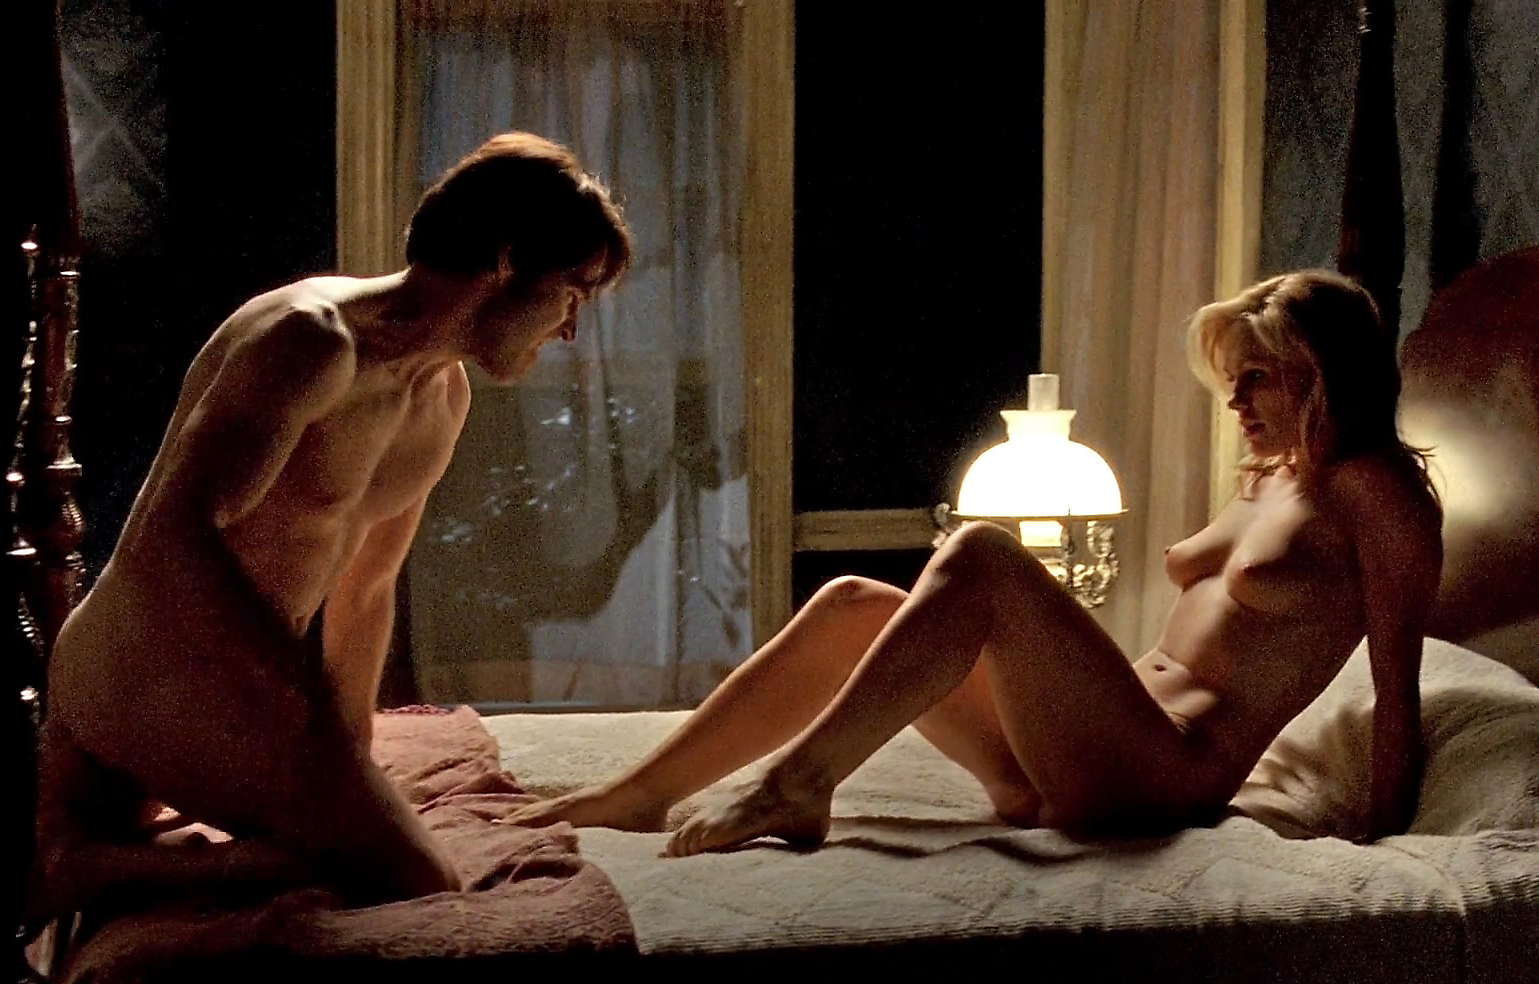 Of nude anna paquin pictures Anna Paquin